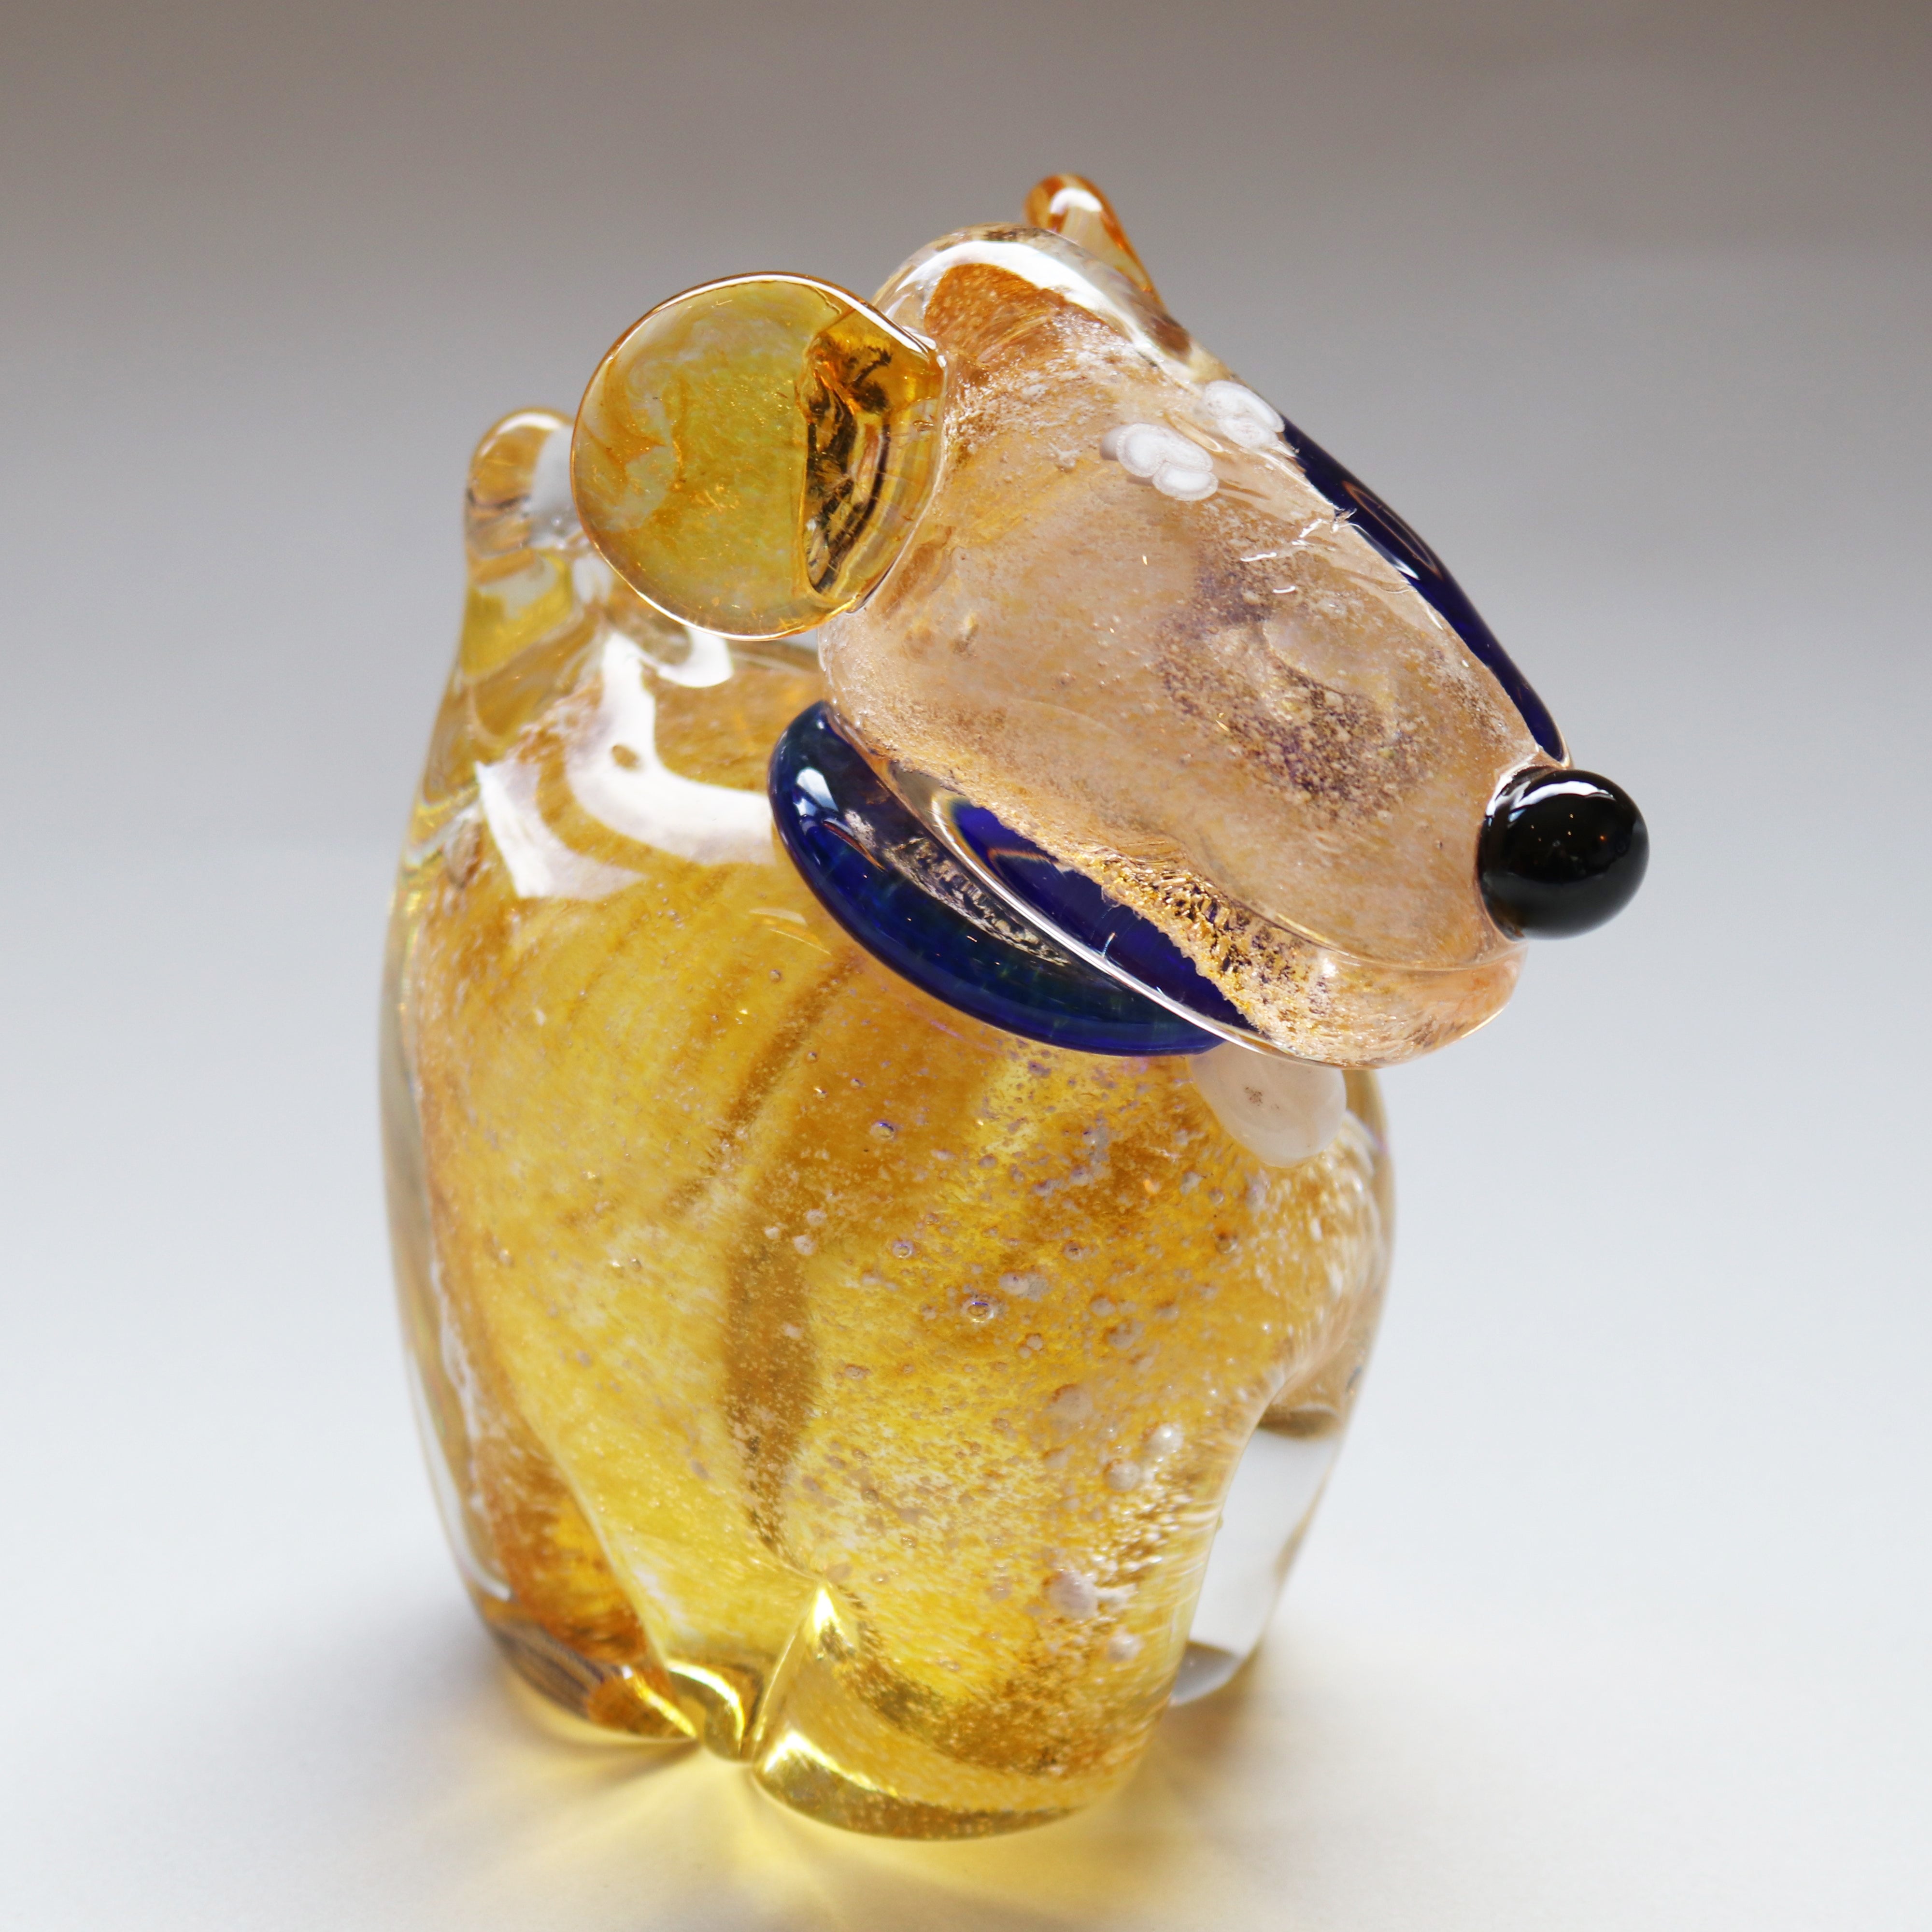 Glass dog with ashes specially made to celebrate the life of Teddy, a labrador.
Prices for the memorial dogs @ £200